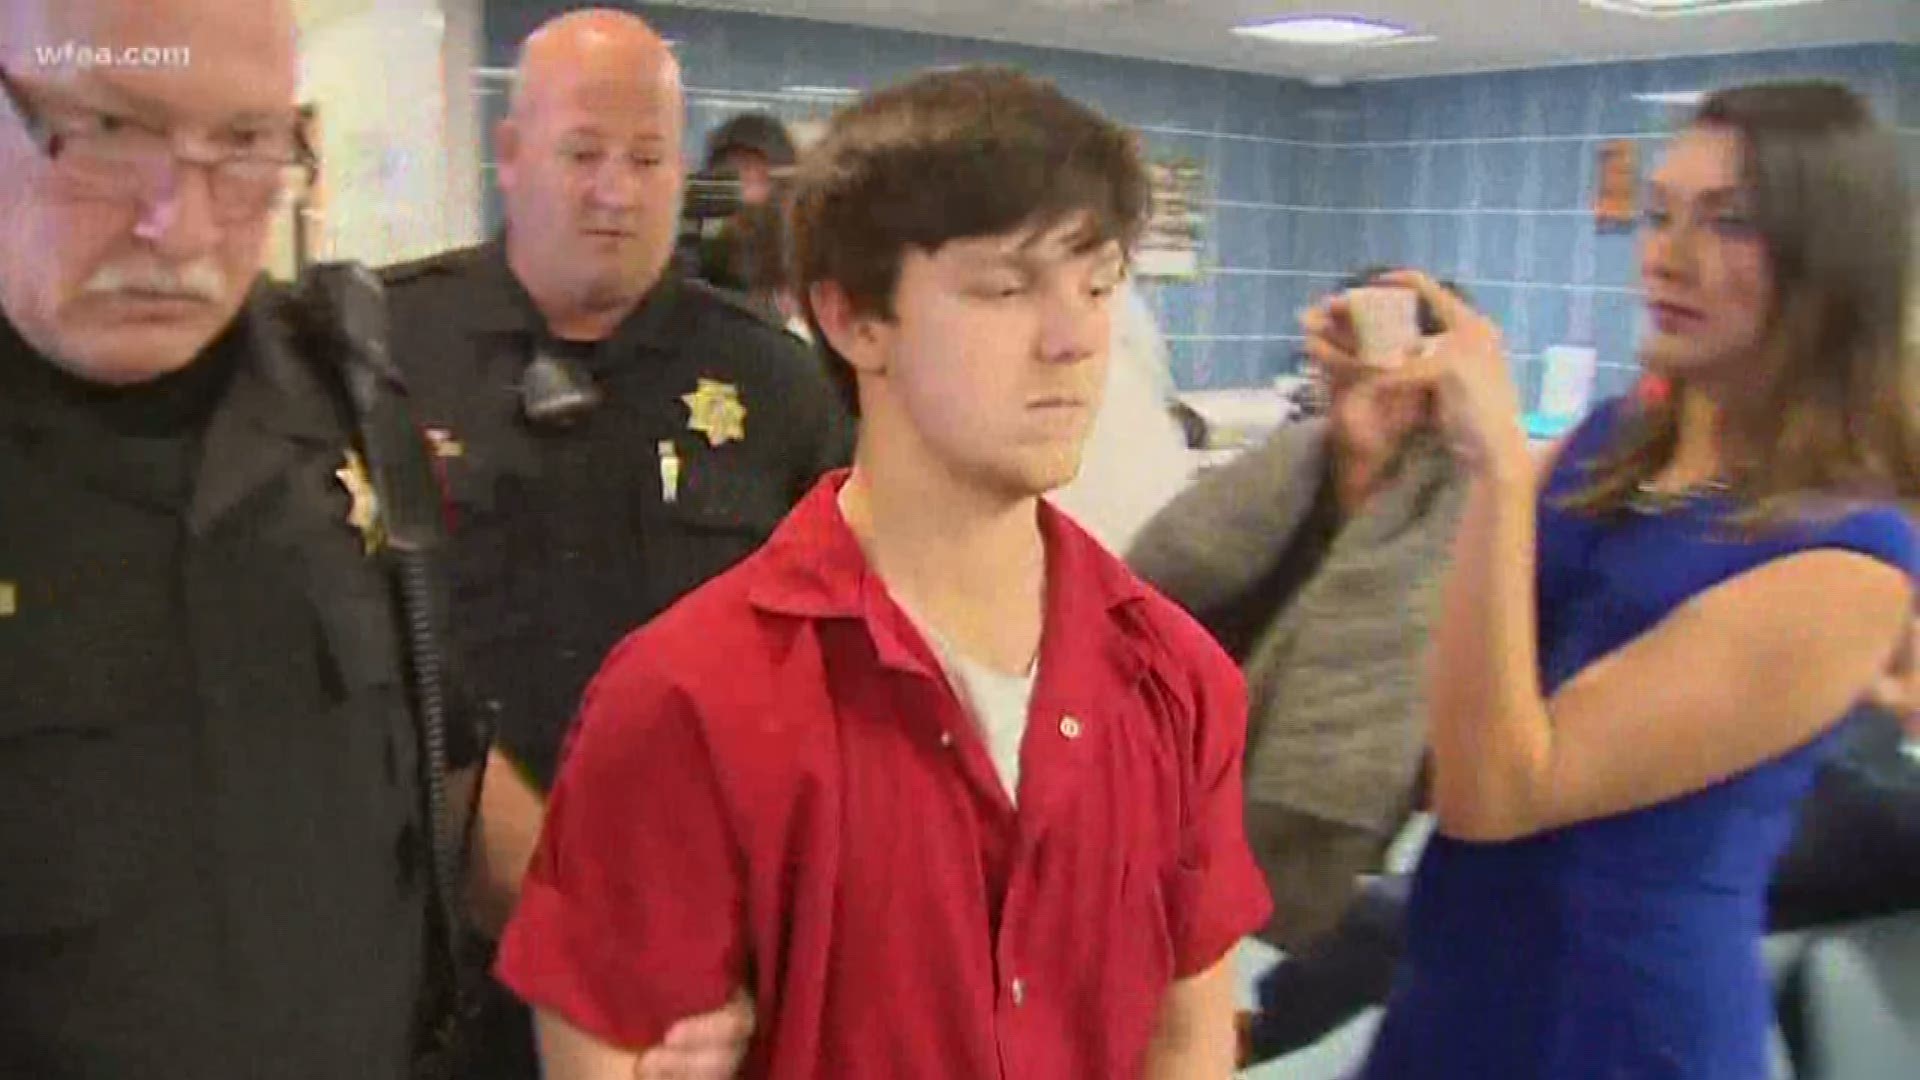 Terms of probation for 'affluenza teen' Ethan Couch